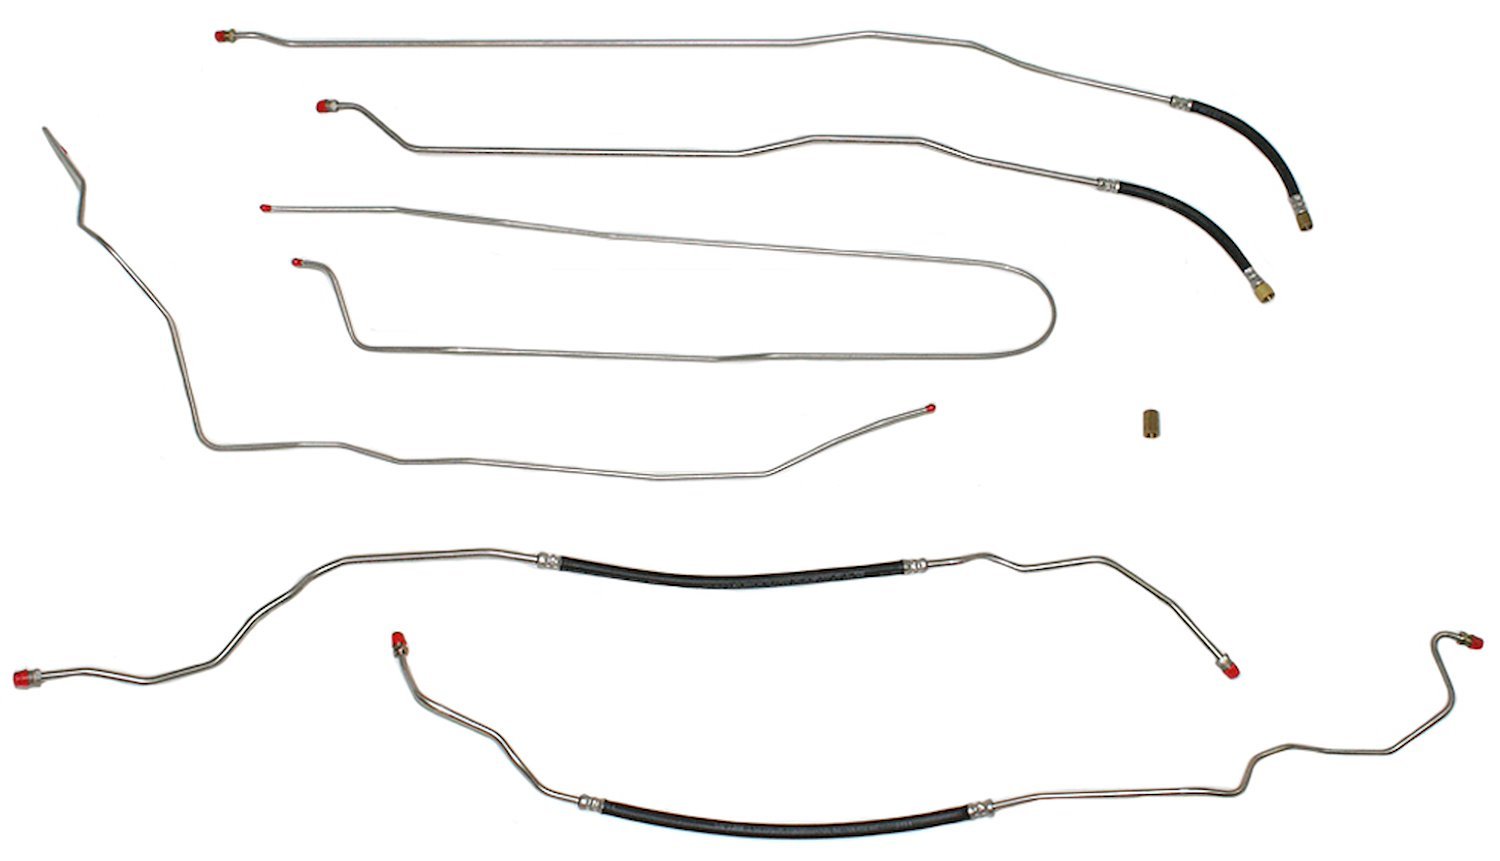 Complete Fuel Line Kit for 1988-1995 GM C1500 Regular Cab/Long Bed Trucks with 305/350 Engines [Stainless Steel]